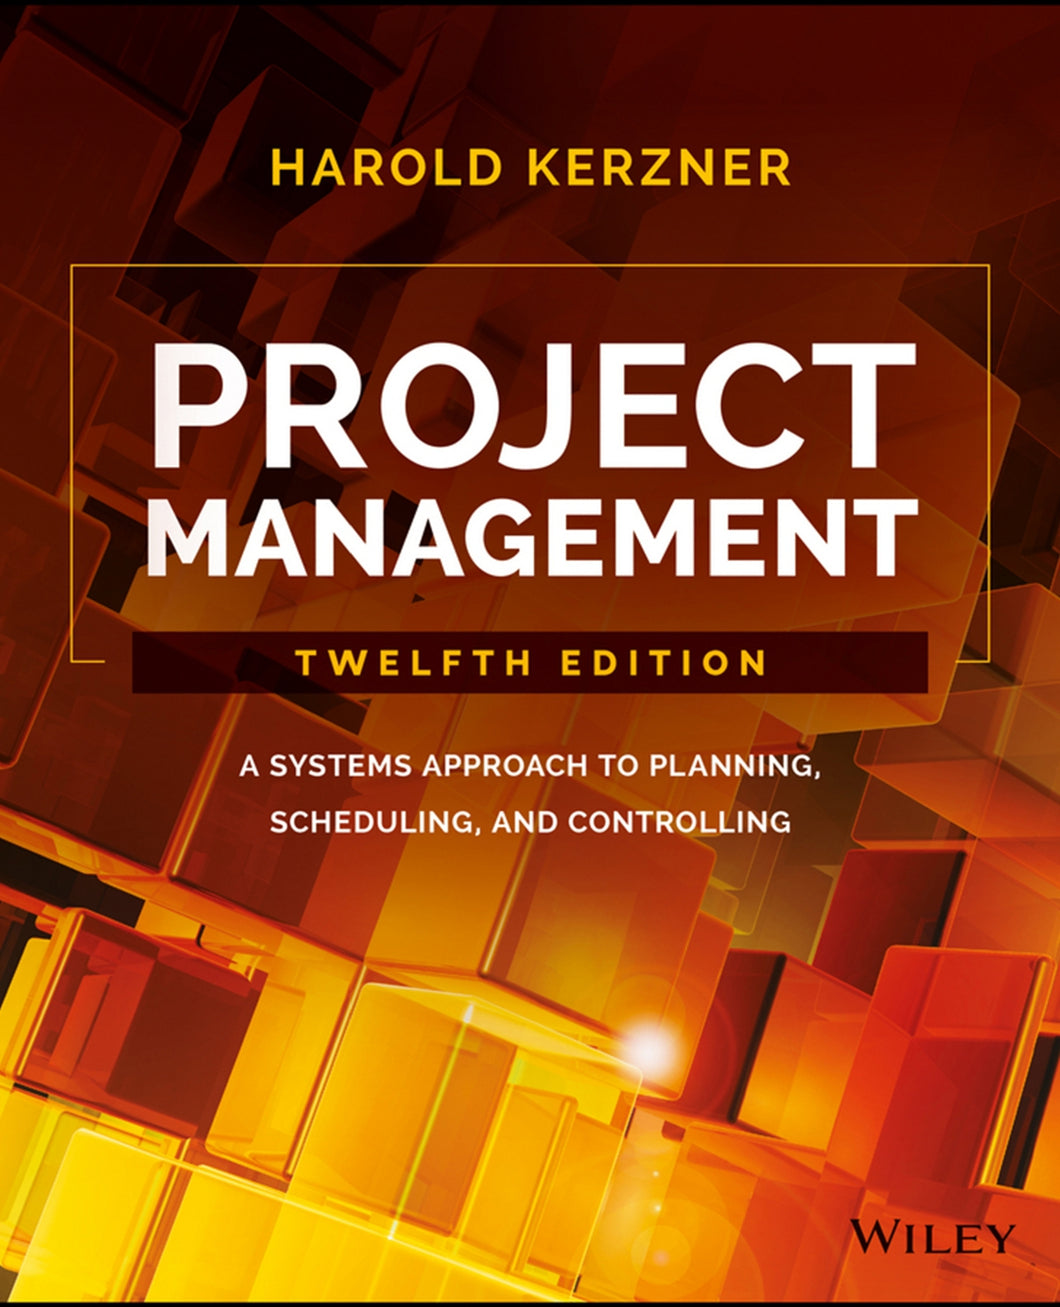 Project Management: A Systems Approach to Planning, Scheduling, and Controlling 12th Edition